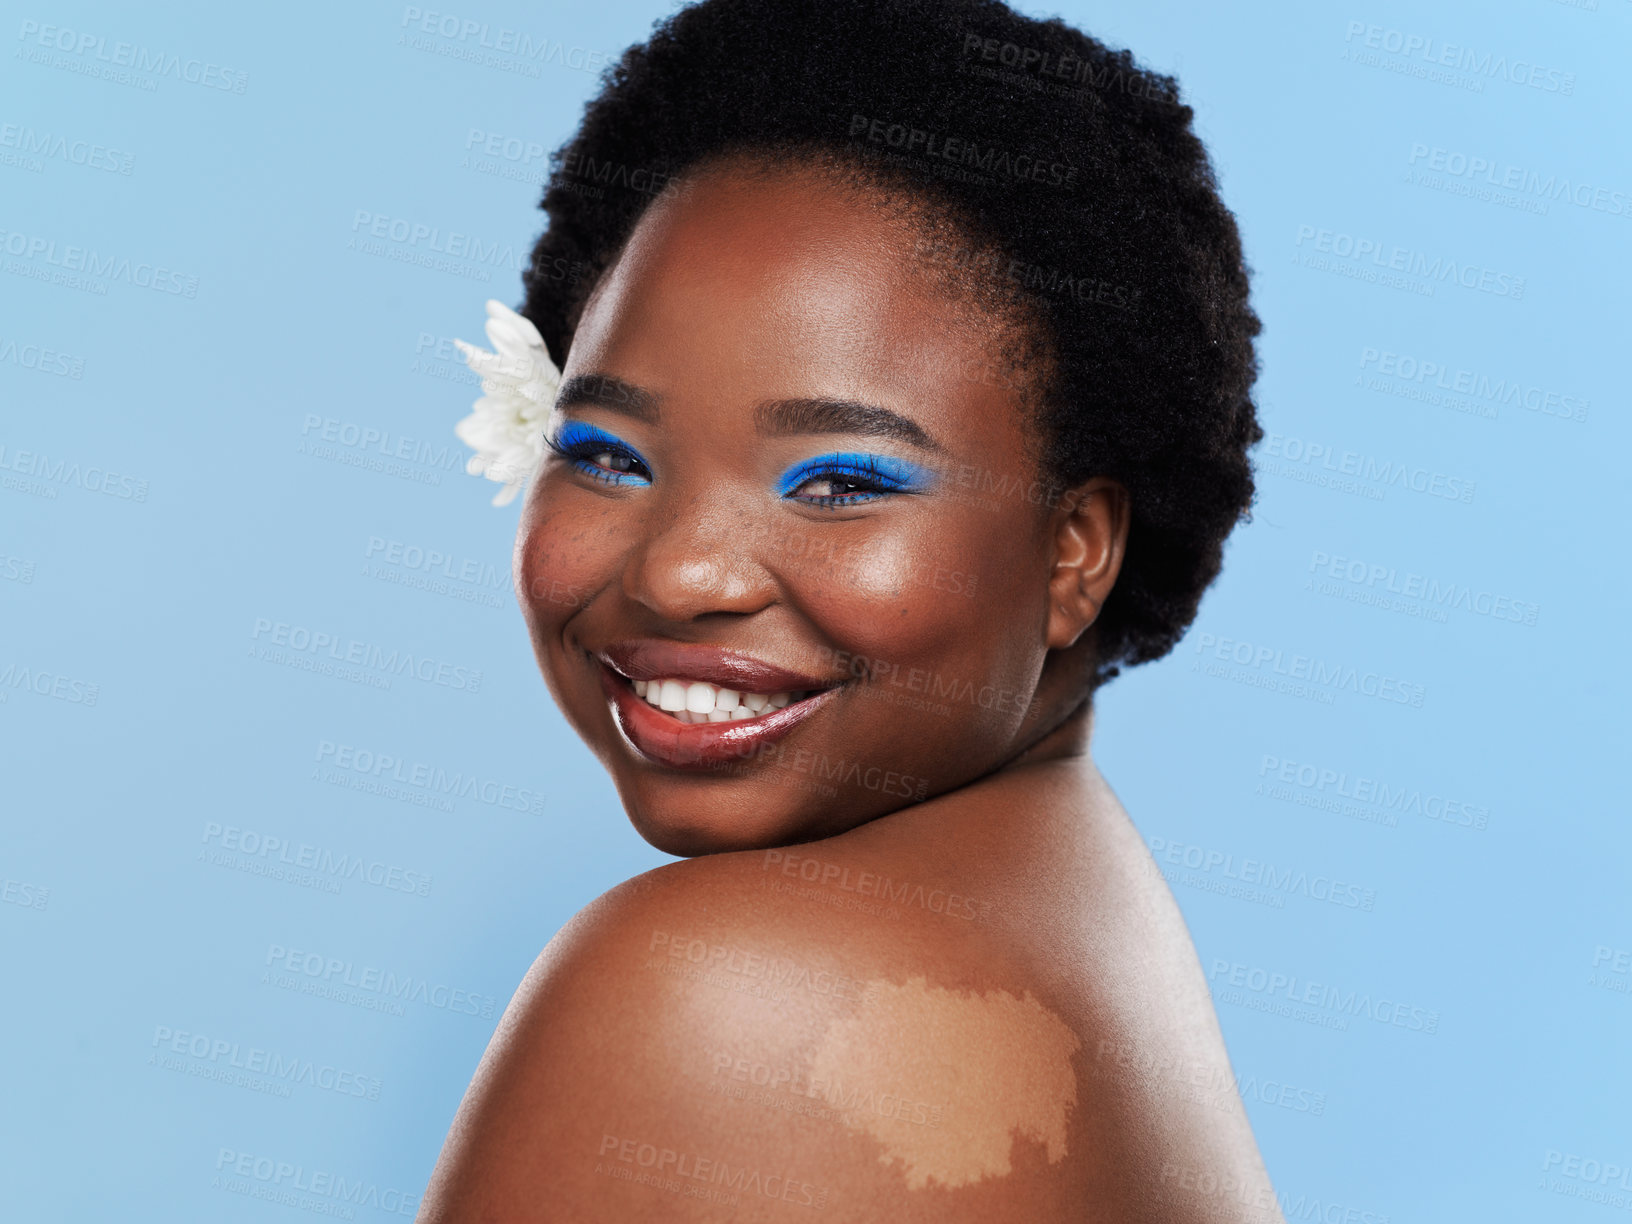 Buy stock photo Studio shot of a beautiful young woman with a flower behind her ear against a blue background